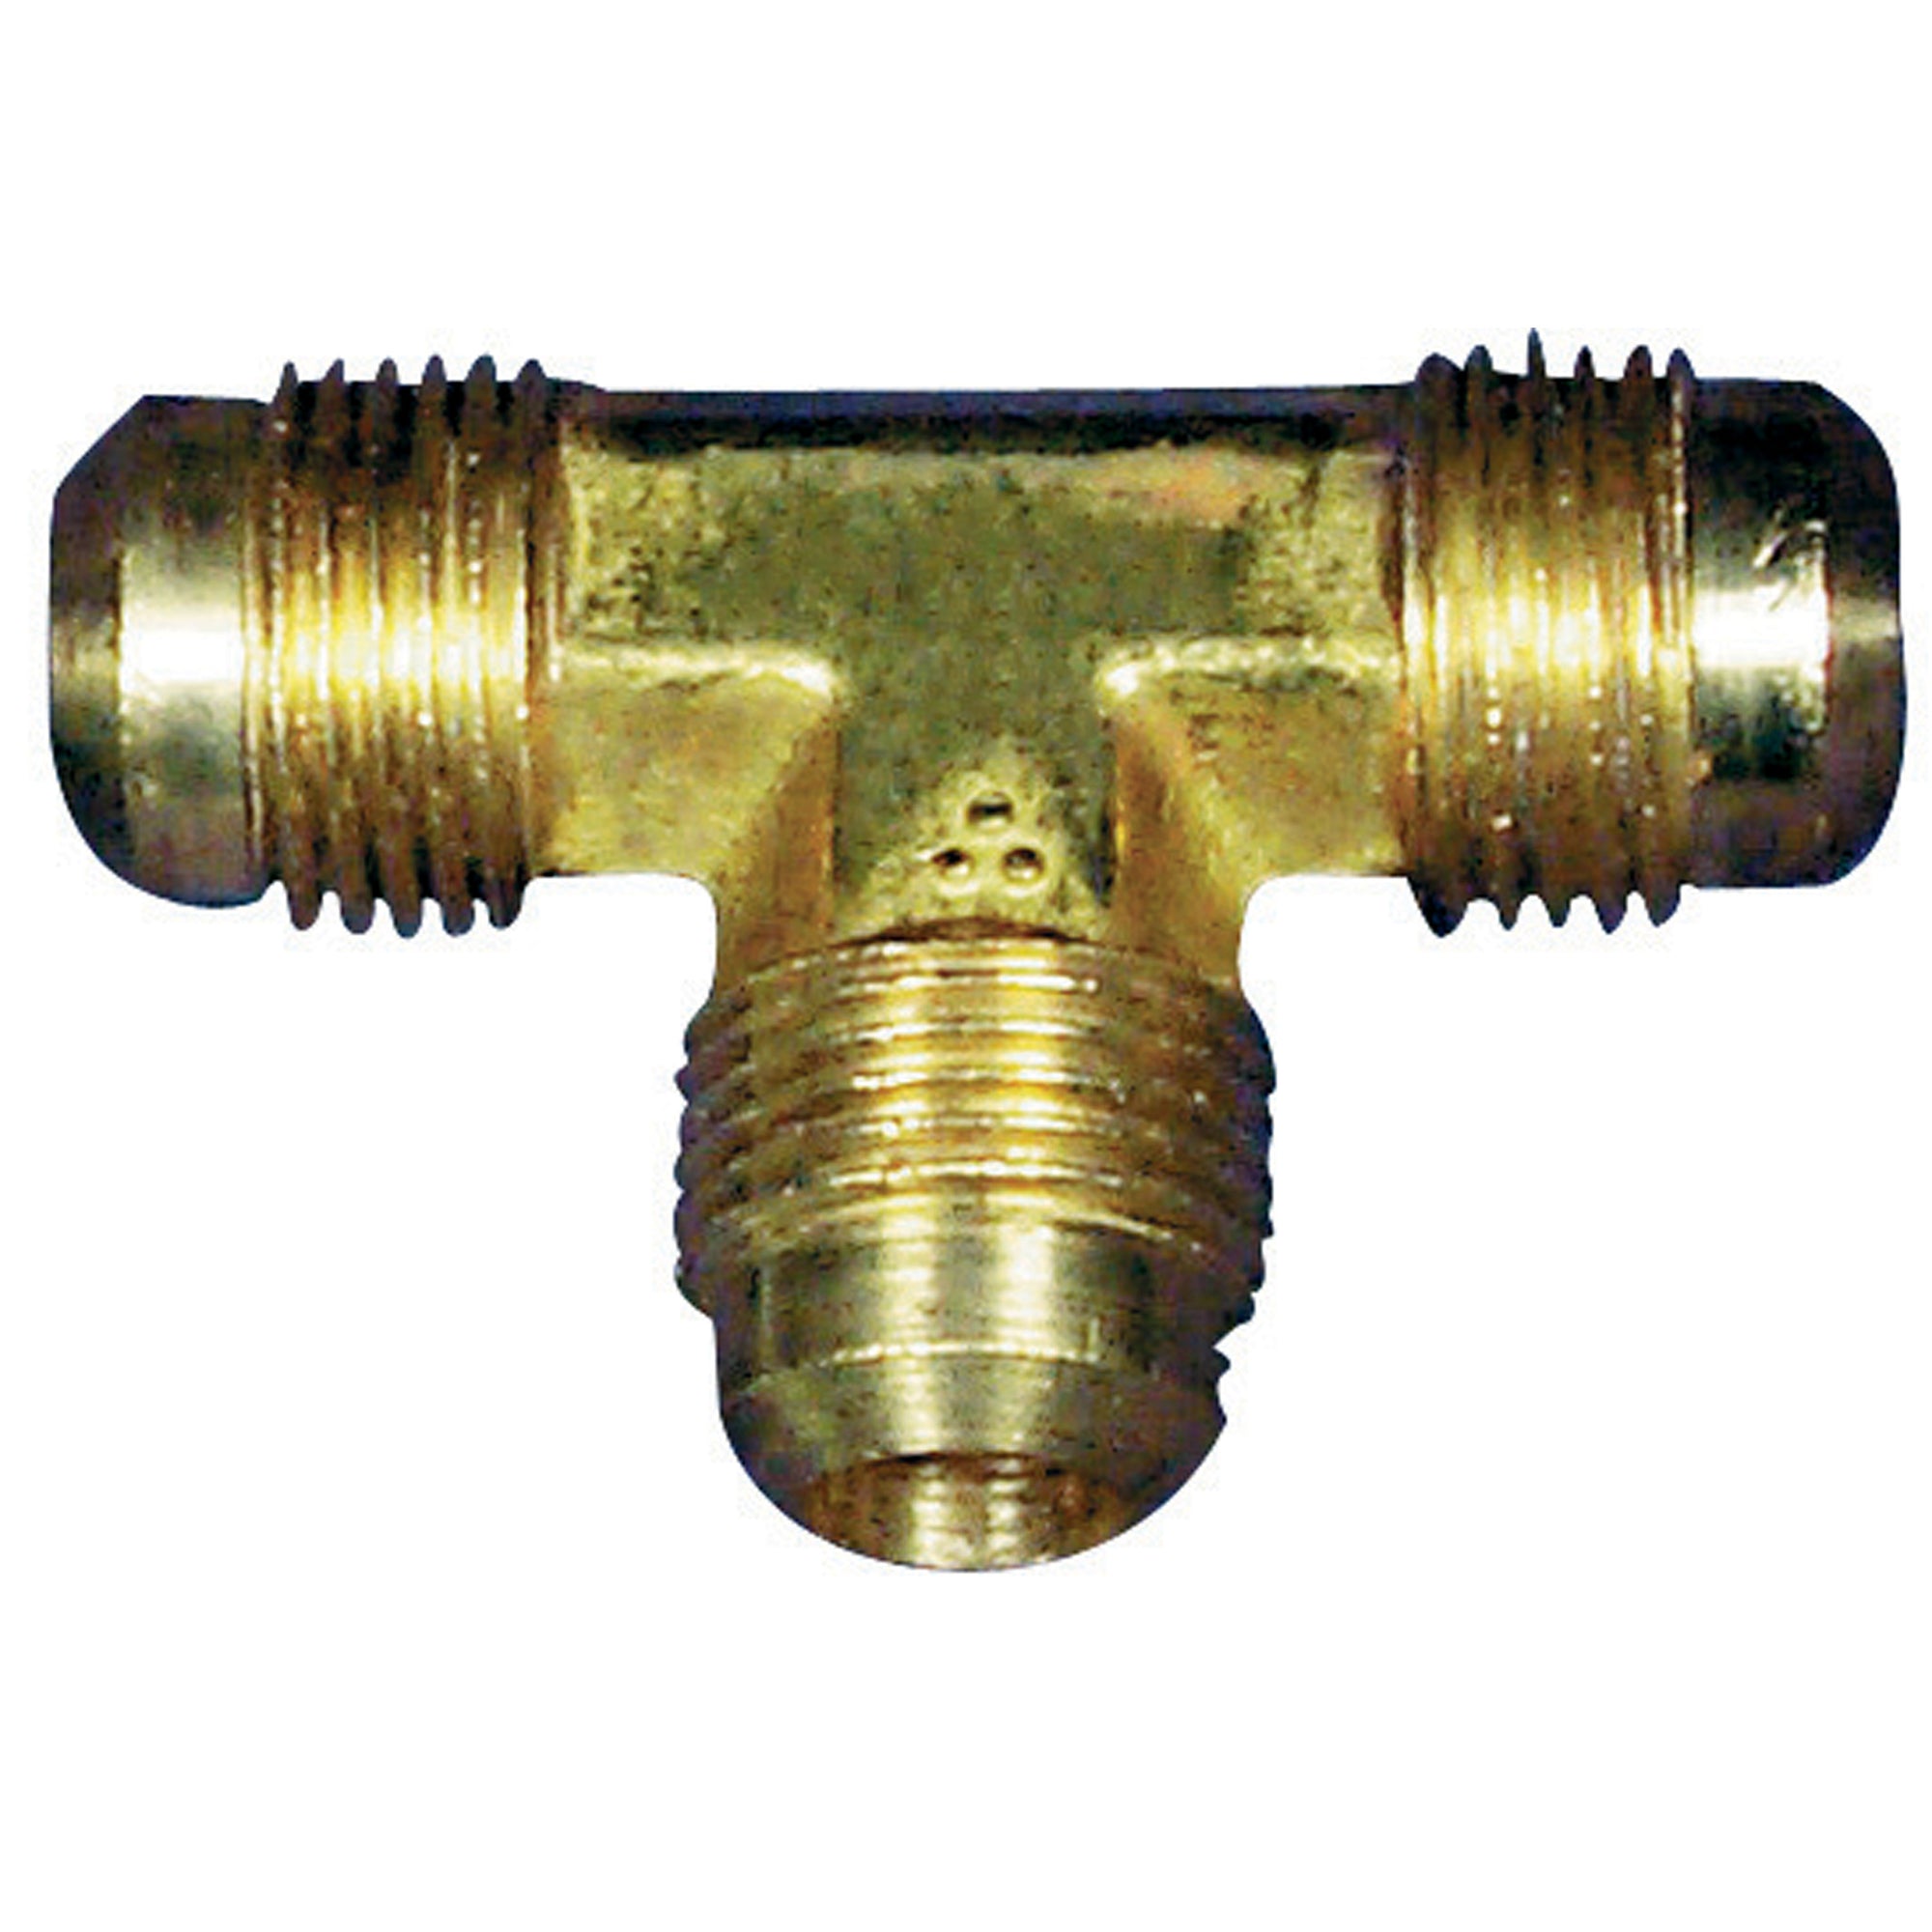 Midland Metal 10-161 SAE 45 Degree Flare Union Tee - 3/8 in. x 3/8 in. x 3/8 in., Each